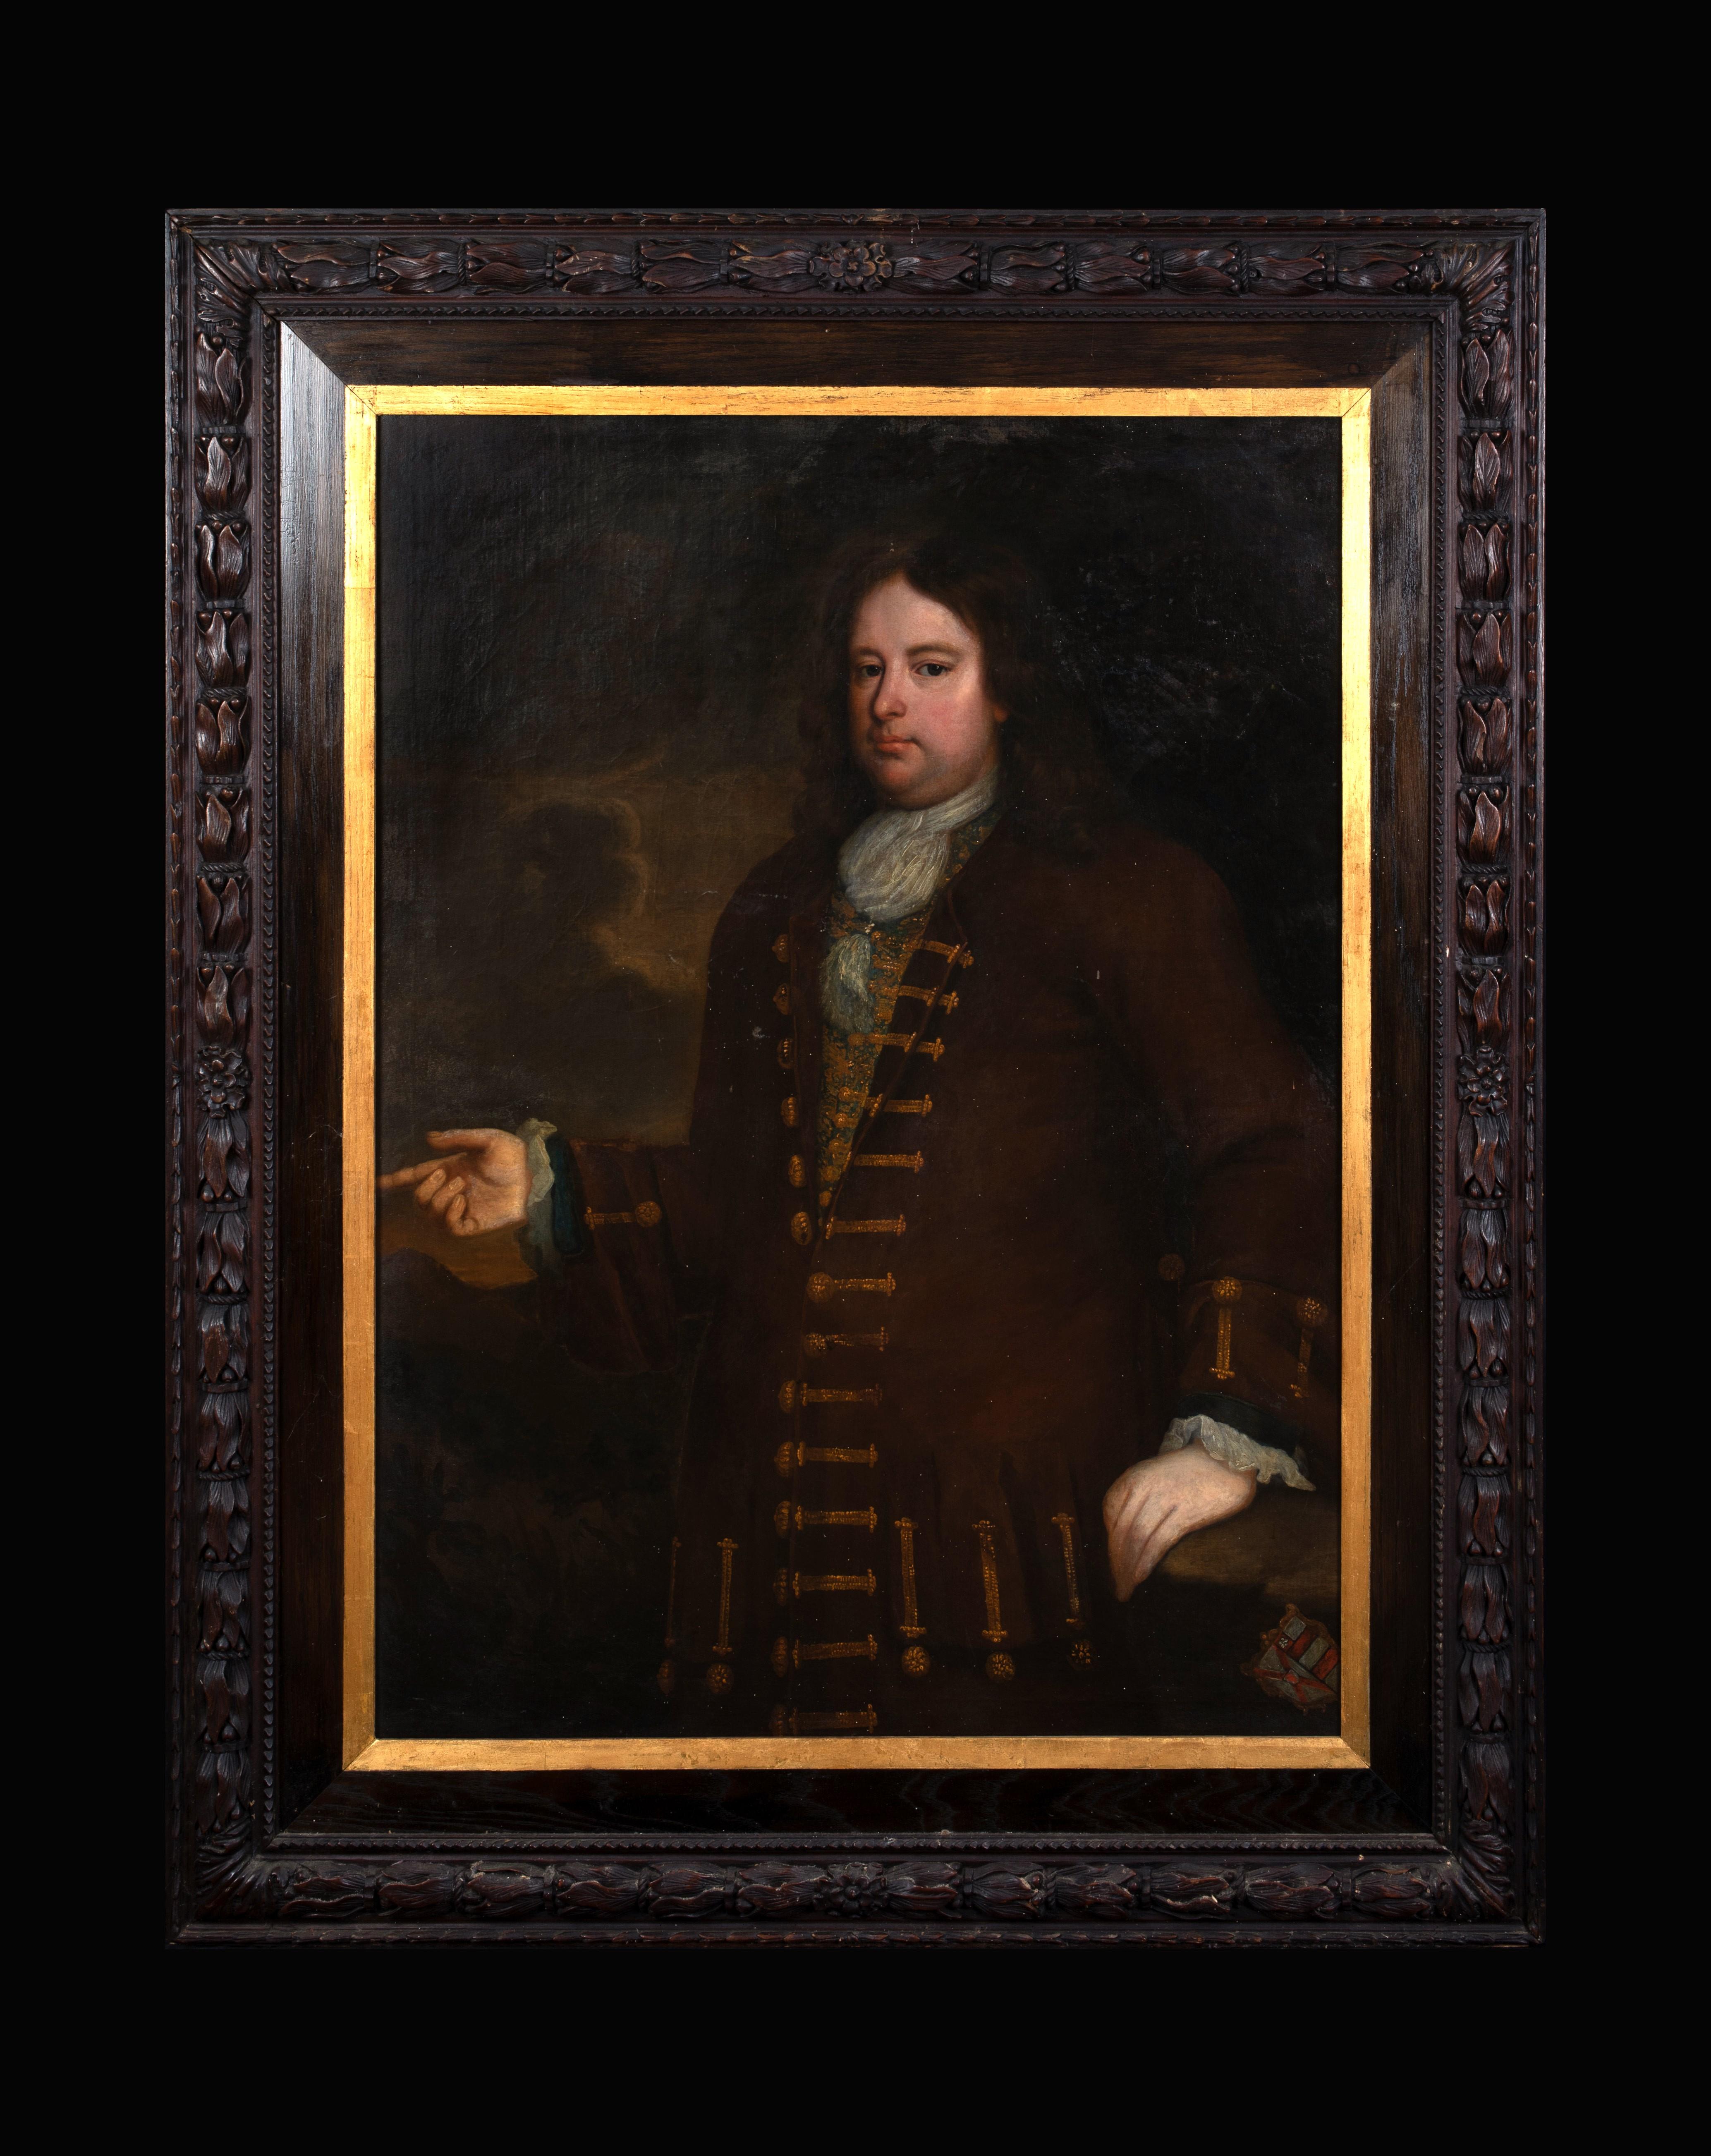 Portrait Identified As Charles Montagu, 1st Earl of Halifax (1661-1715), circa 1695

Founder Of The Bank Of England

circle of SIR GODFREY KNELLER (1646-1723)

Large 17th Century Portrait of a gentleman identified as Charles Montagu, 1st Earl of